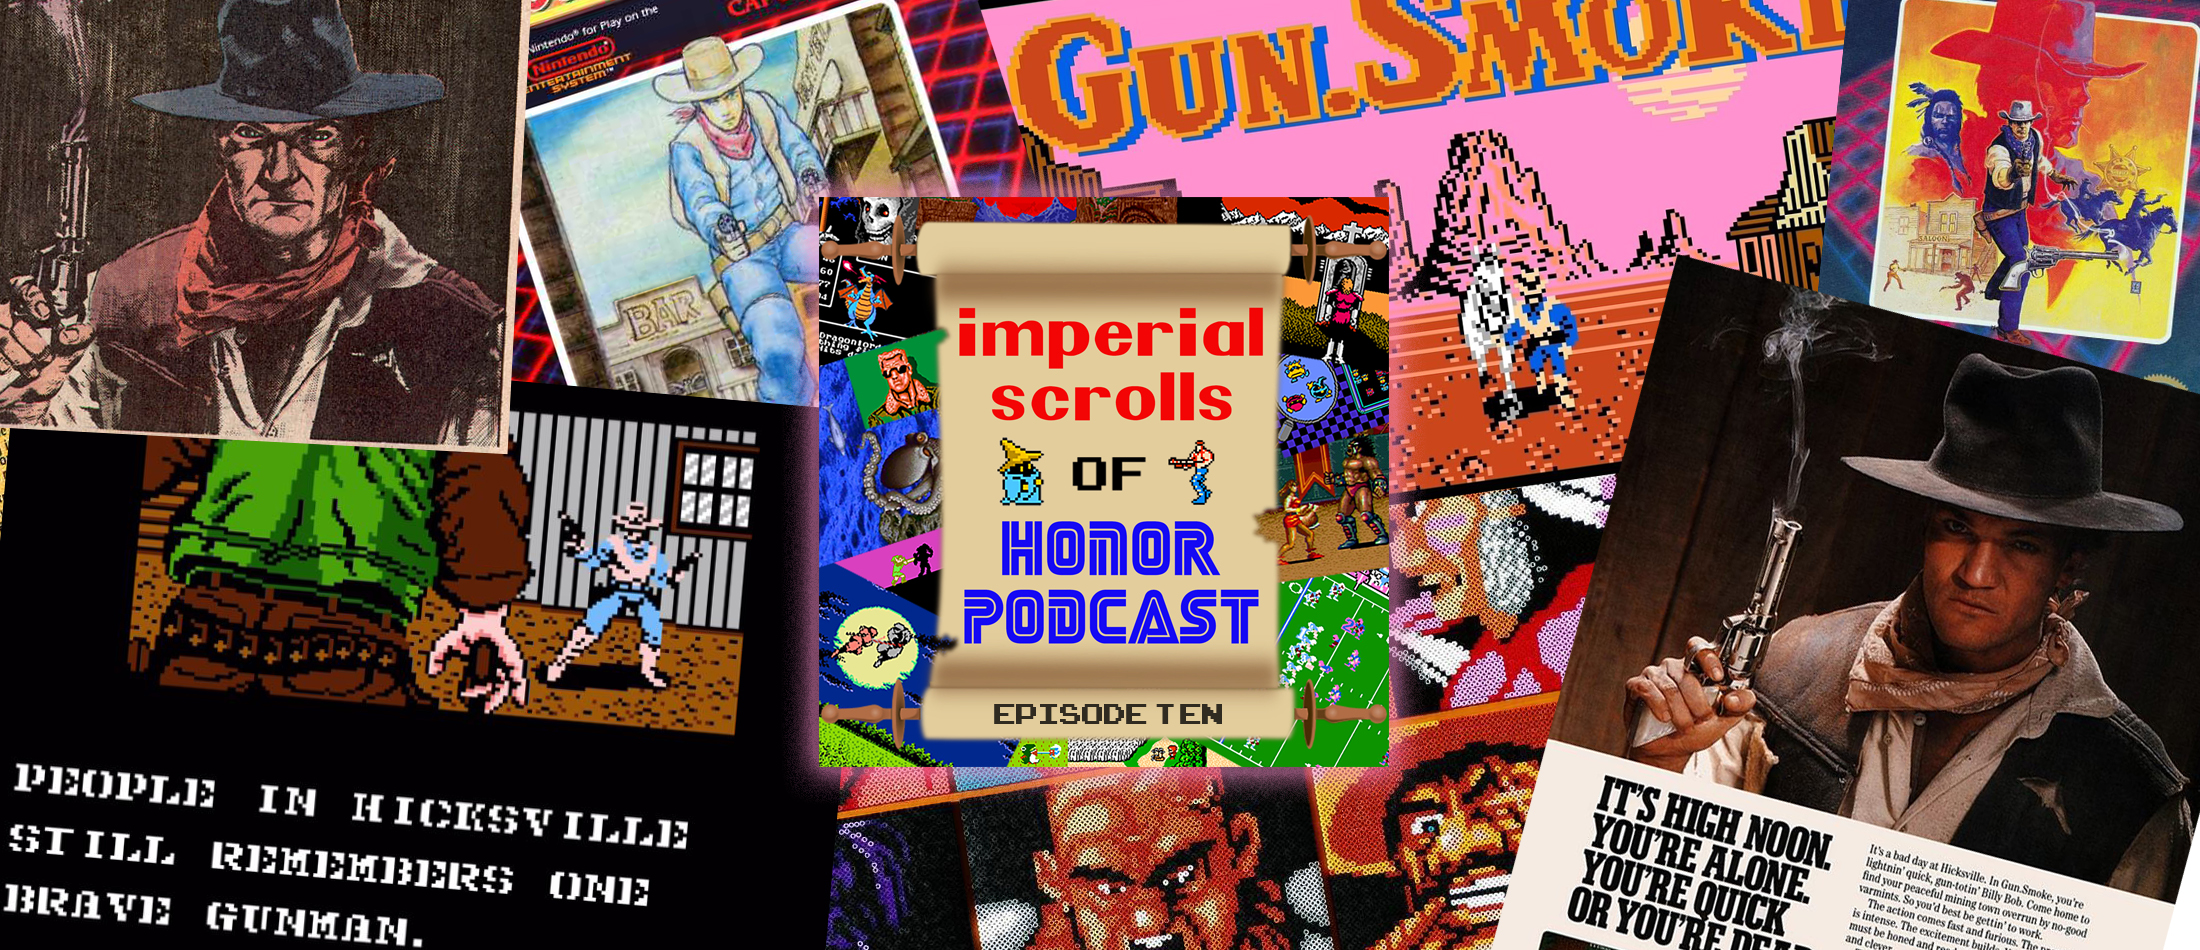 Imperial Scrolls of Honor Podcast - Episode 10 - Gun.Smoke (NES)